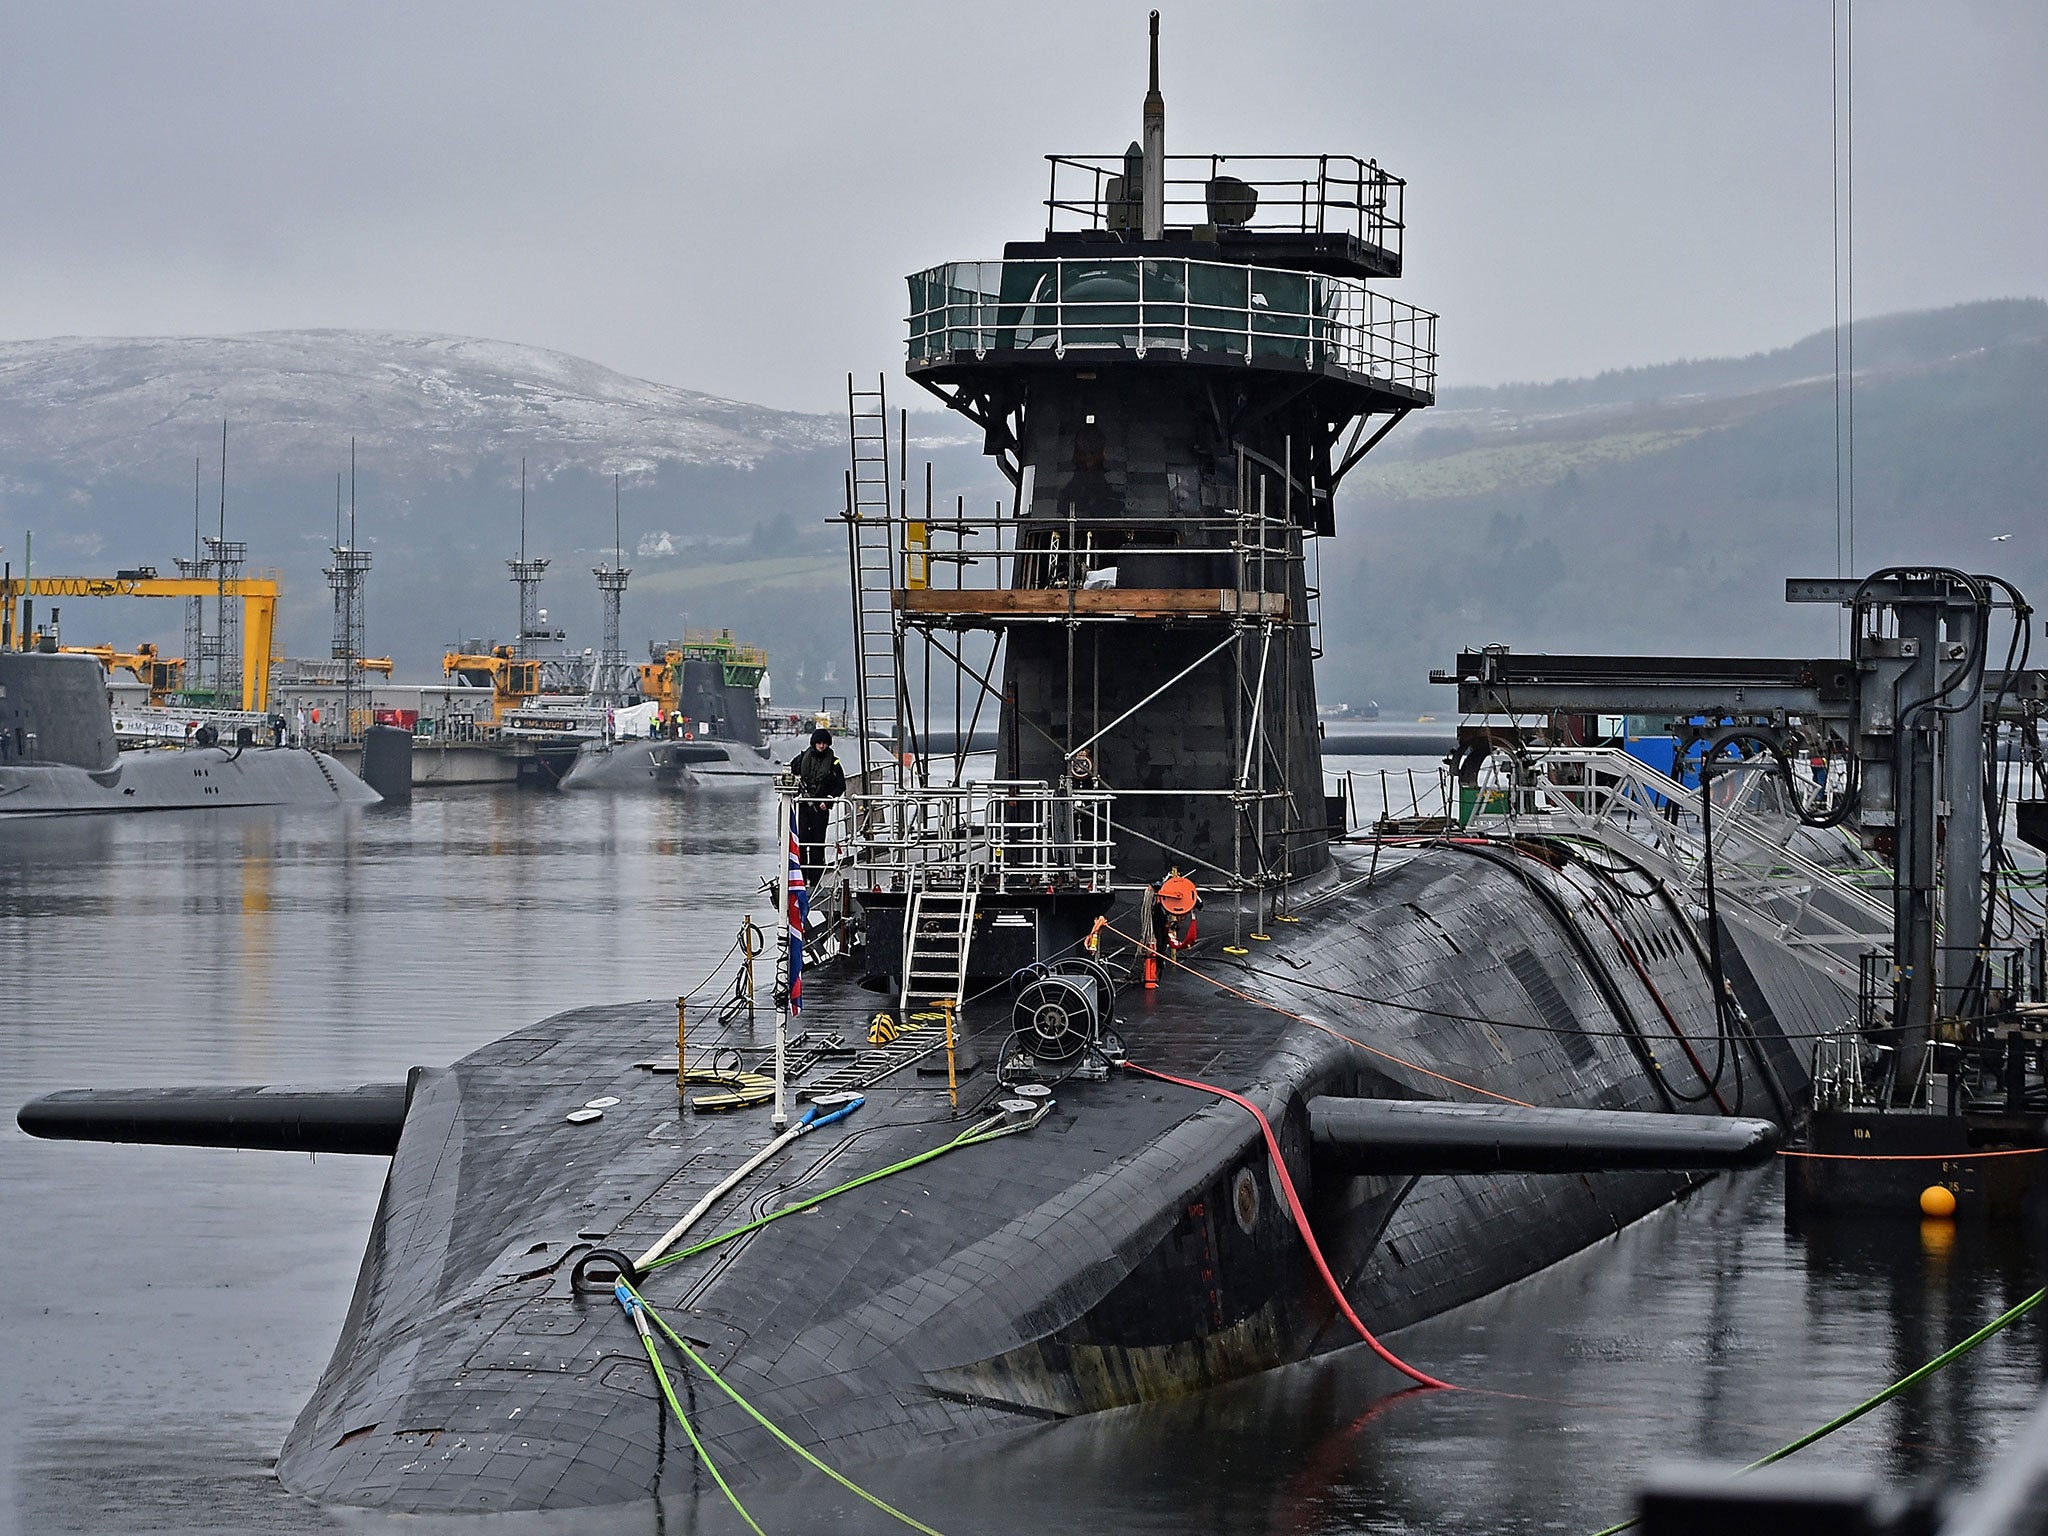 HMS Vigilant, one of Britain’s four Trident nuclear missile-armed submarines, at its Faslane base in Scotland